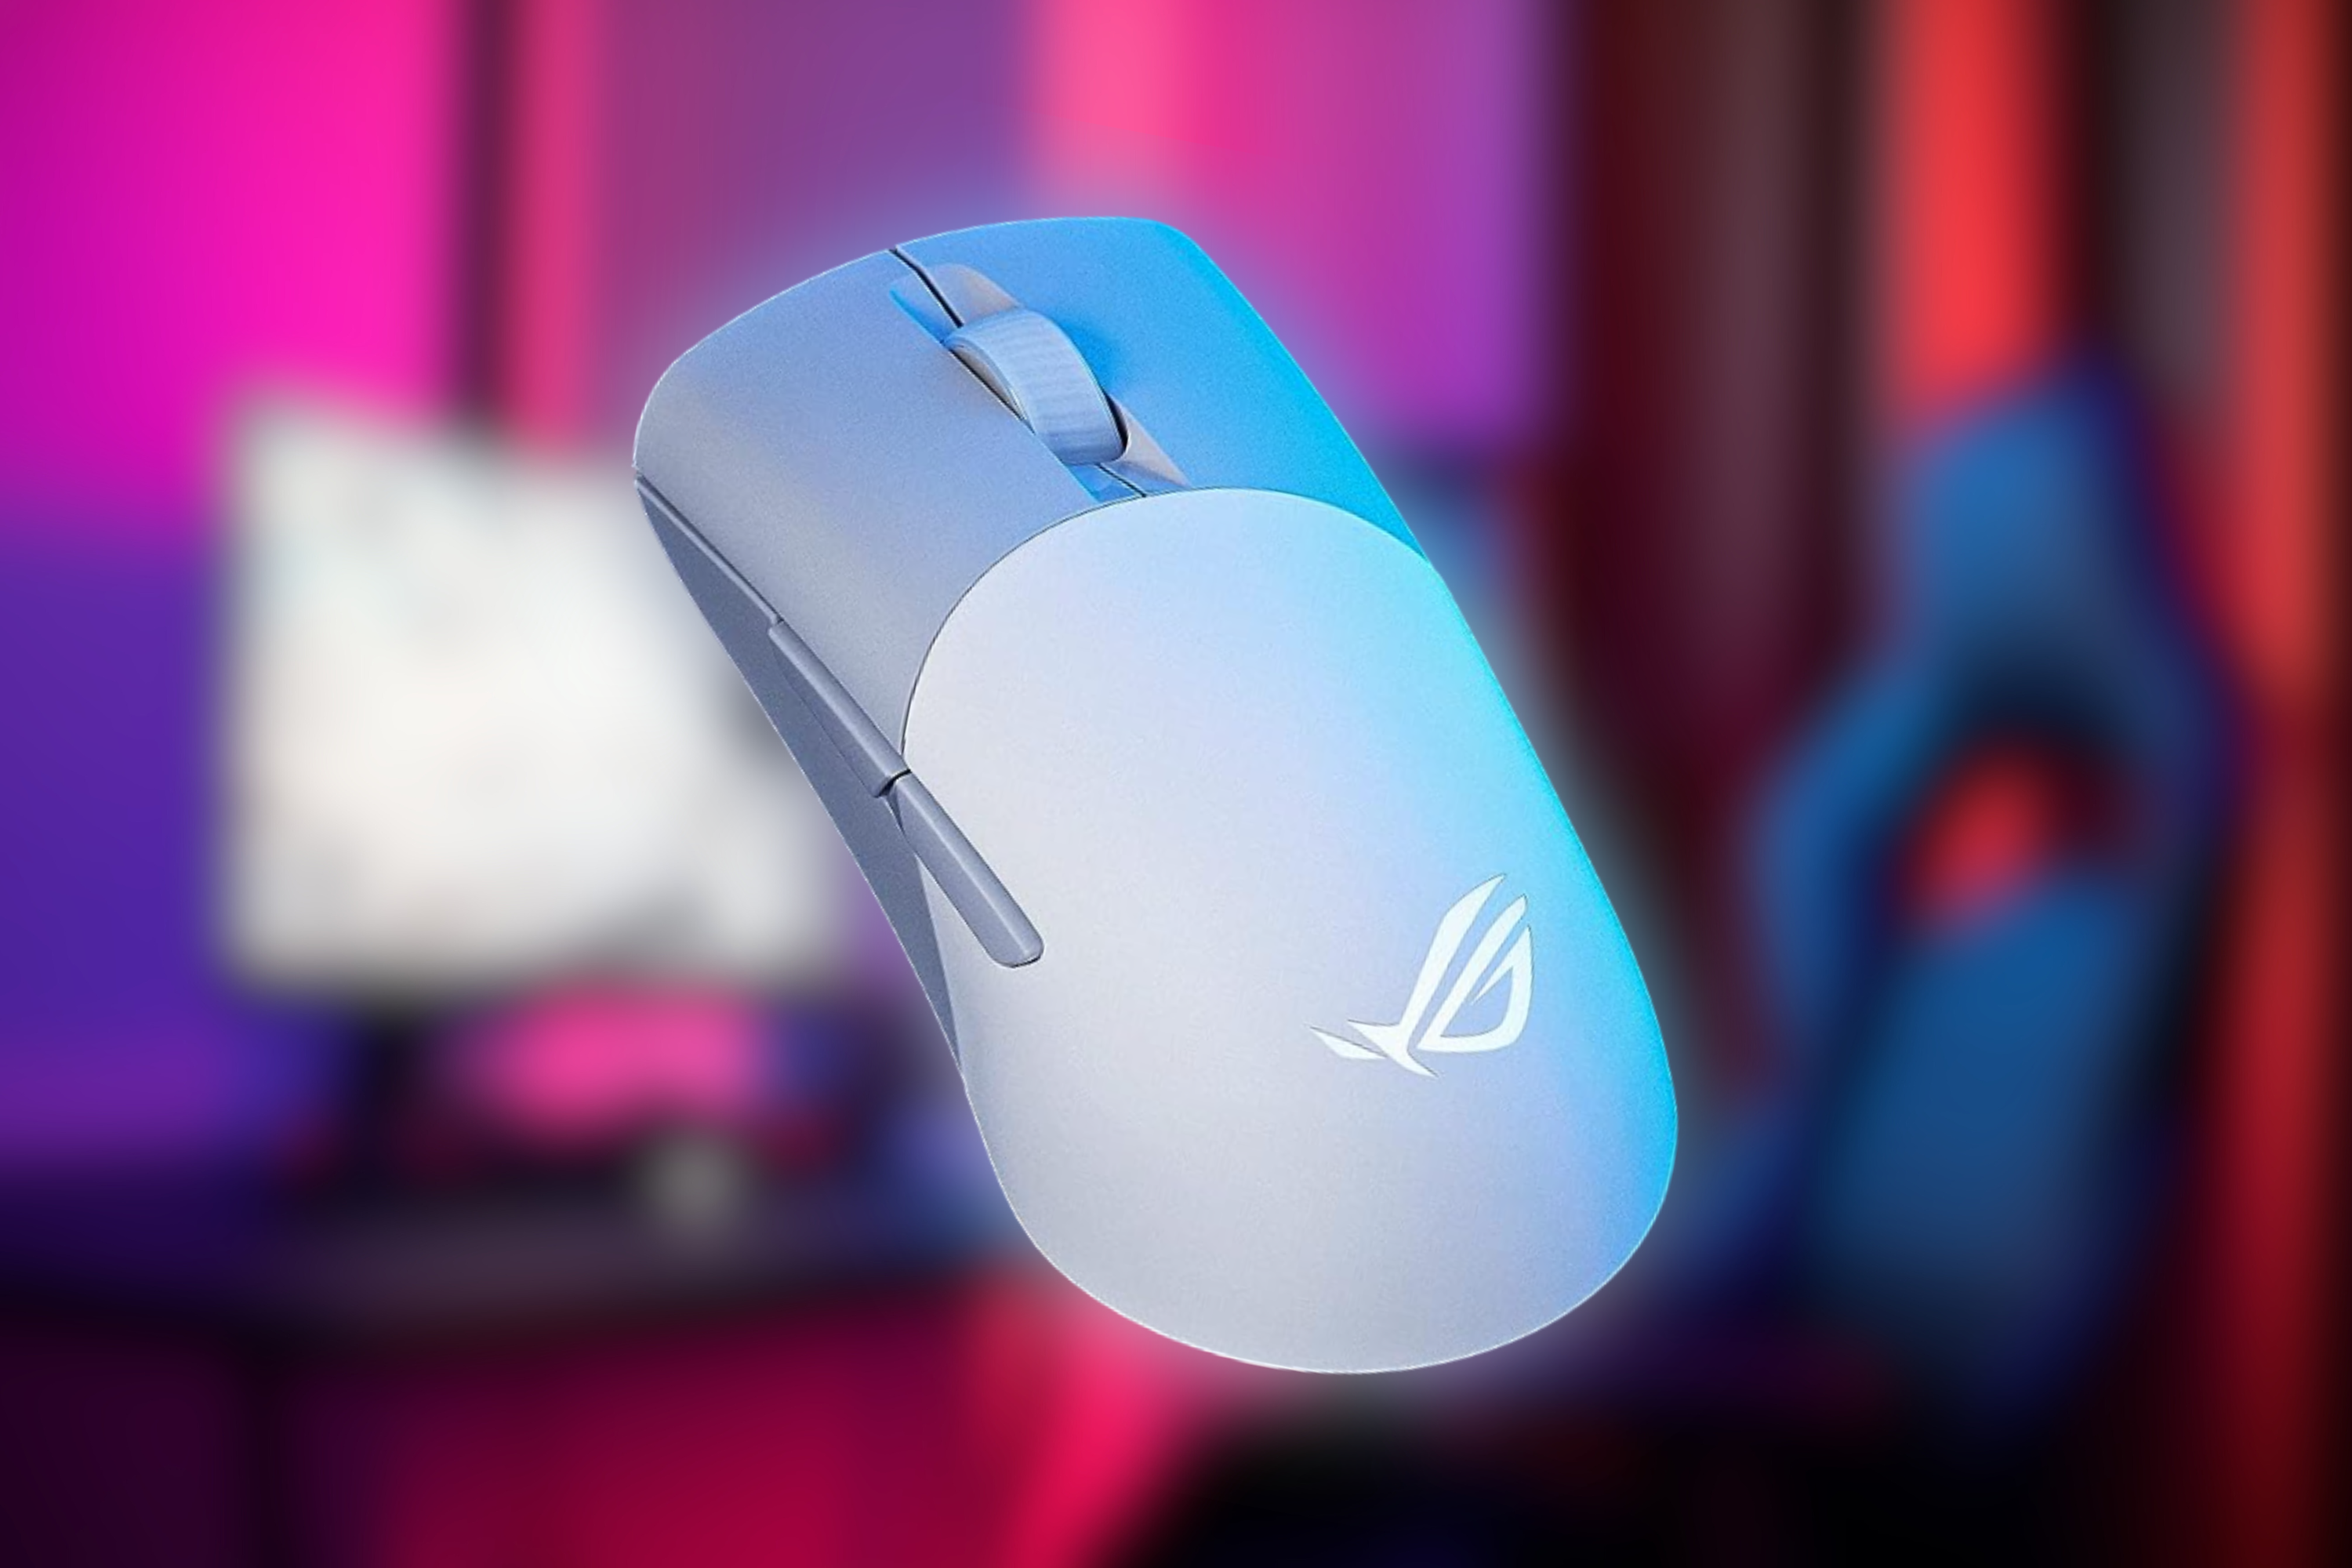 Asus ROG Keris Wireless AimPoint Gaming Mouse on blurred background 